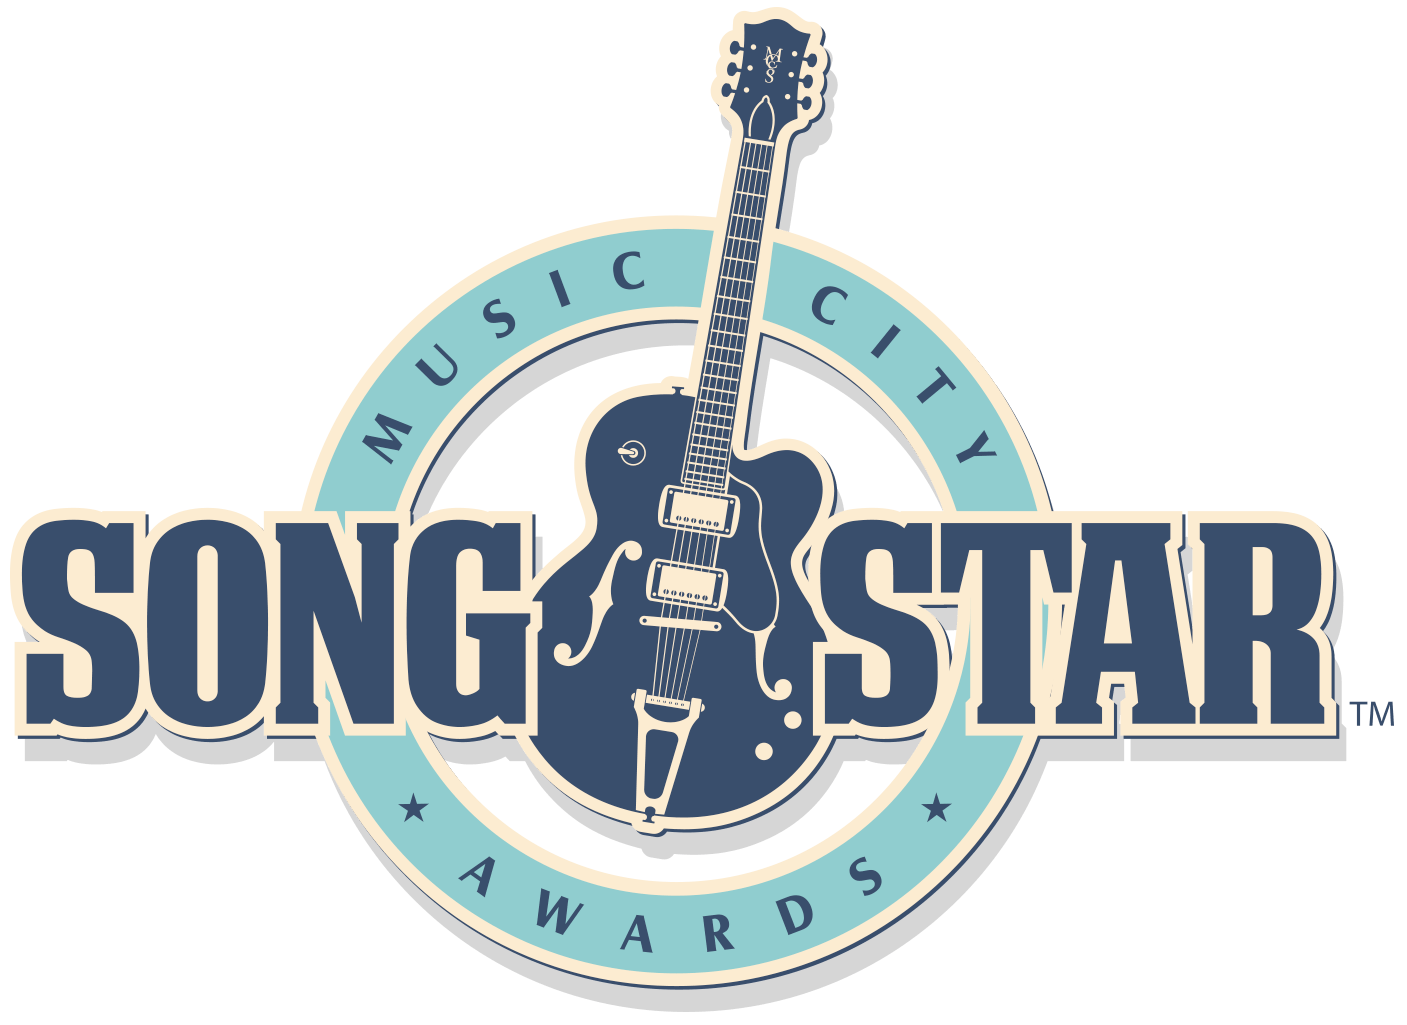 Musical Star Logo - Songwriting Contest for Songwriters Worldwide. Music City SongStar